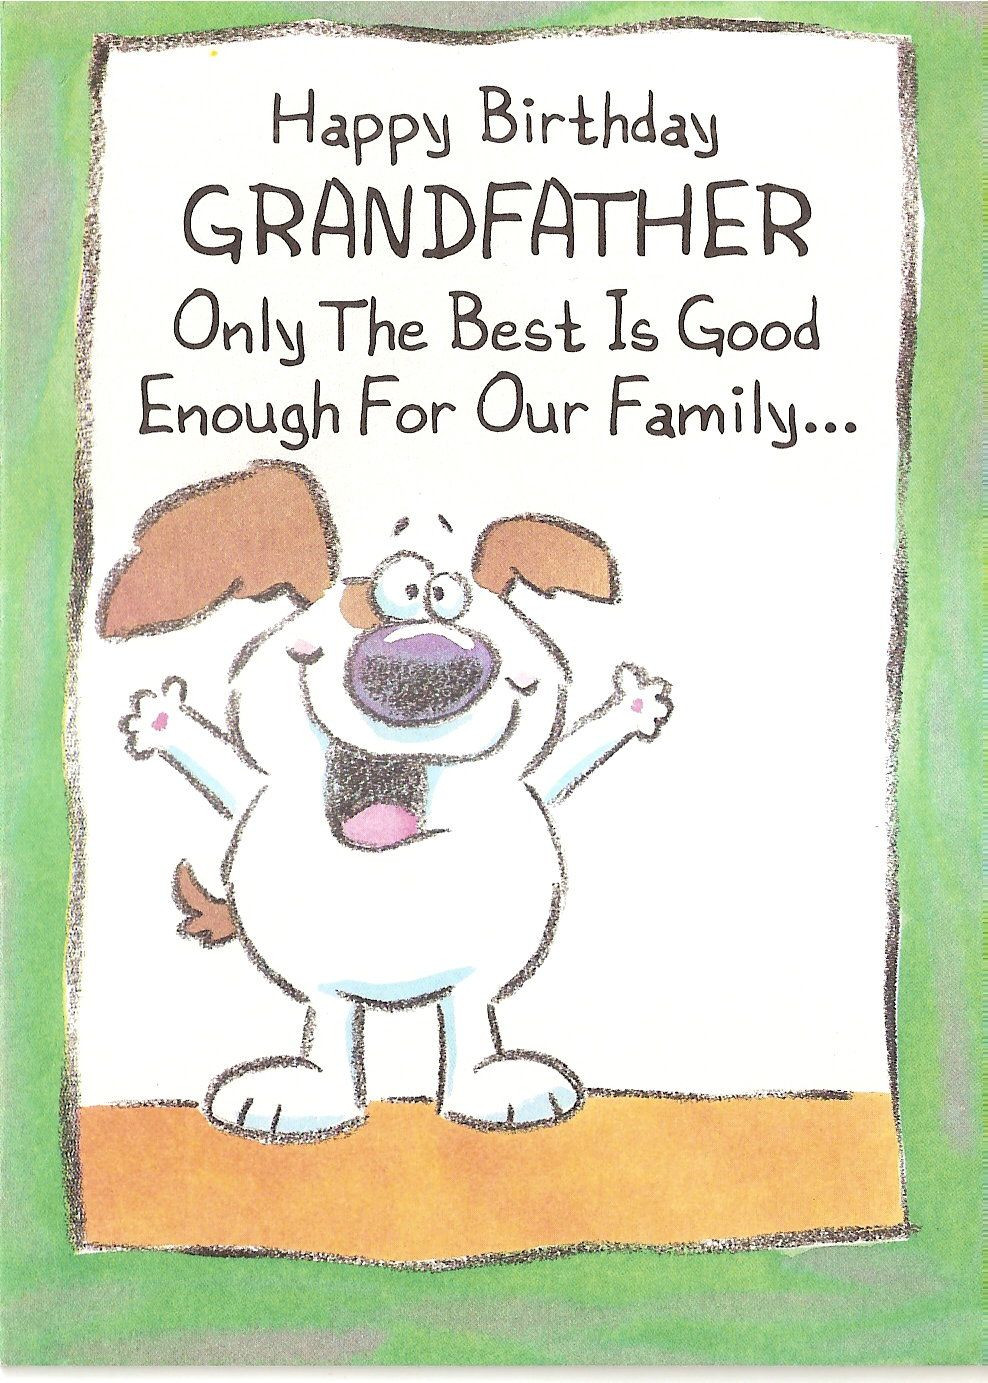 Funny Birthday Cards For Grandpa
 Birthday Cards For Grandpa within ucwords] – Card Design